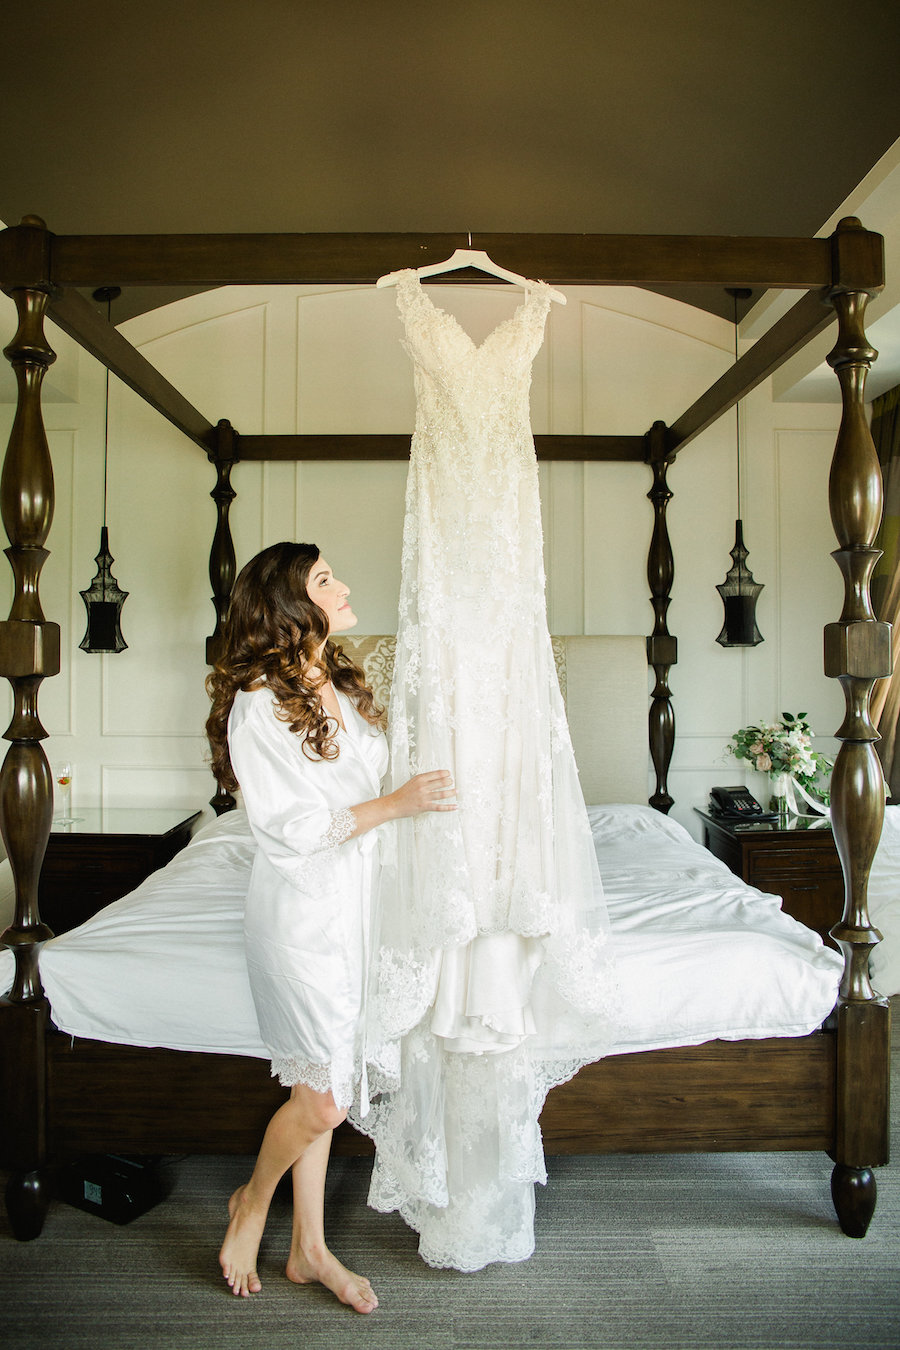 Bride Looking at Gown Hanging From Four Post Bed Wedding Portrait | St. Petersburg Wedding Venue The Birchwood | Tampa Bay Wedding Photographer Ailyn La Torre Photography